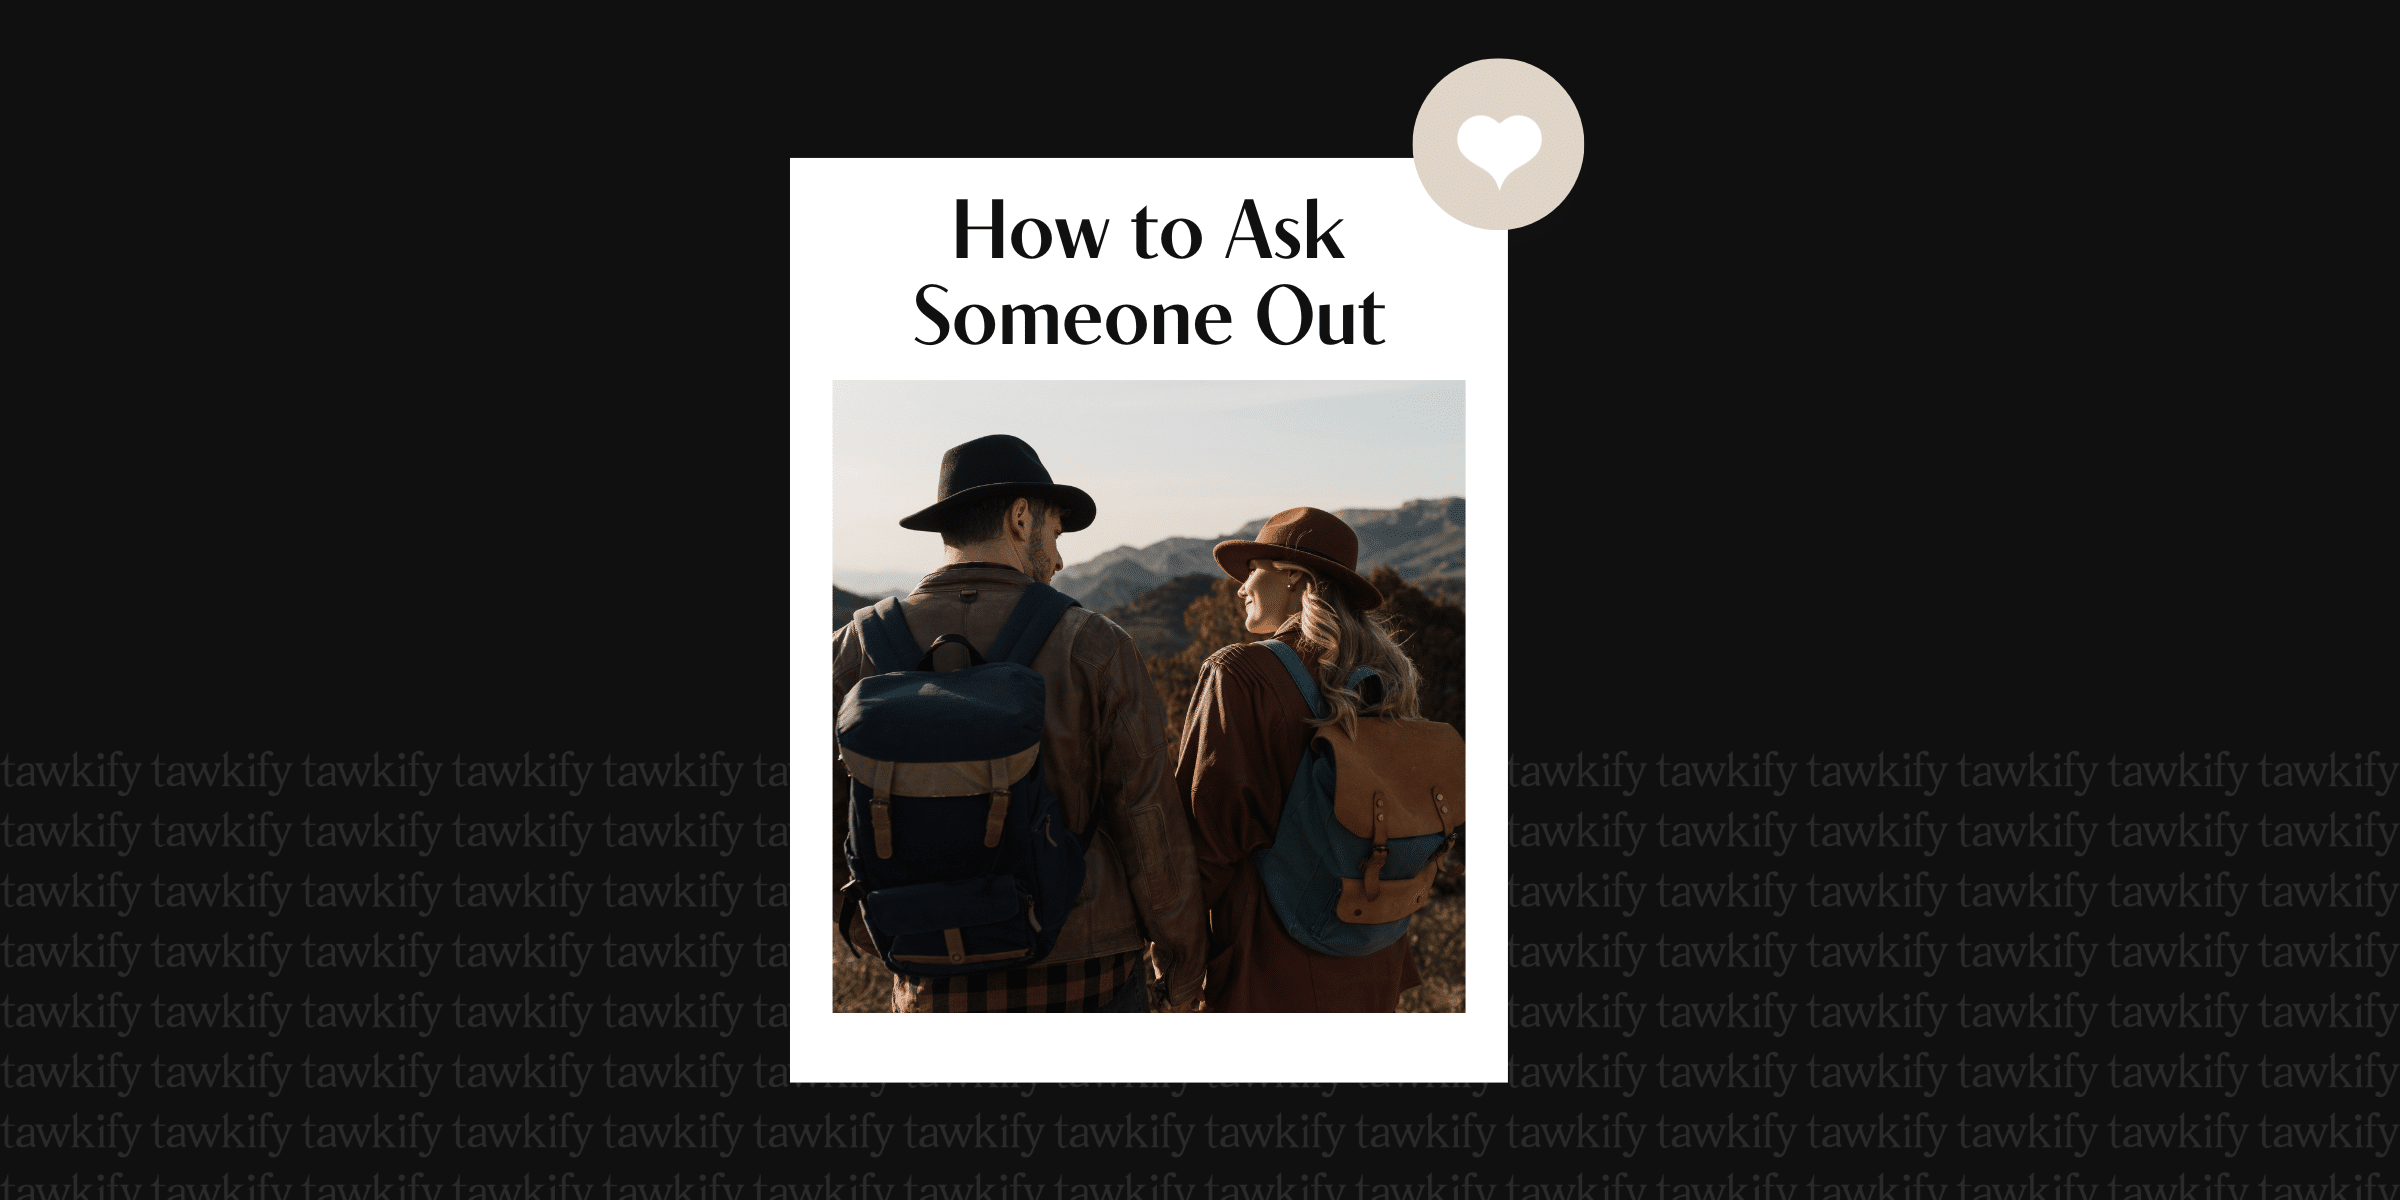 Asking someone out can be a little scary, but we’re here to help boost your confidence! Check out our guide for the best advice on how to ask someone out.